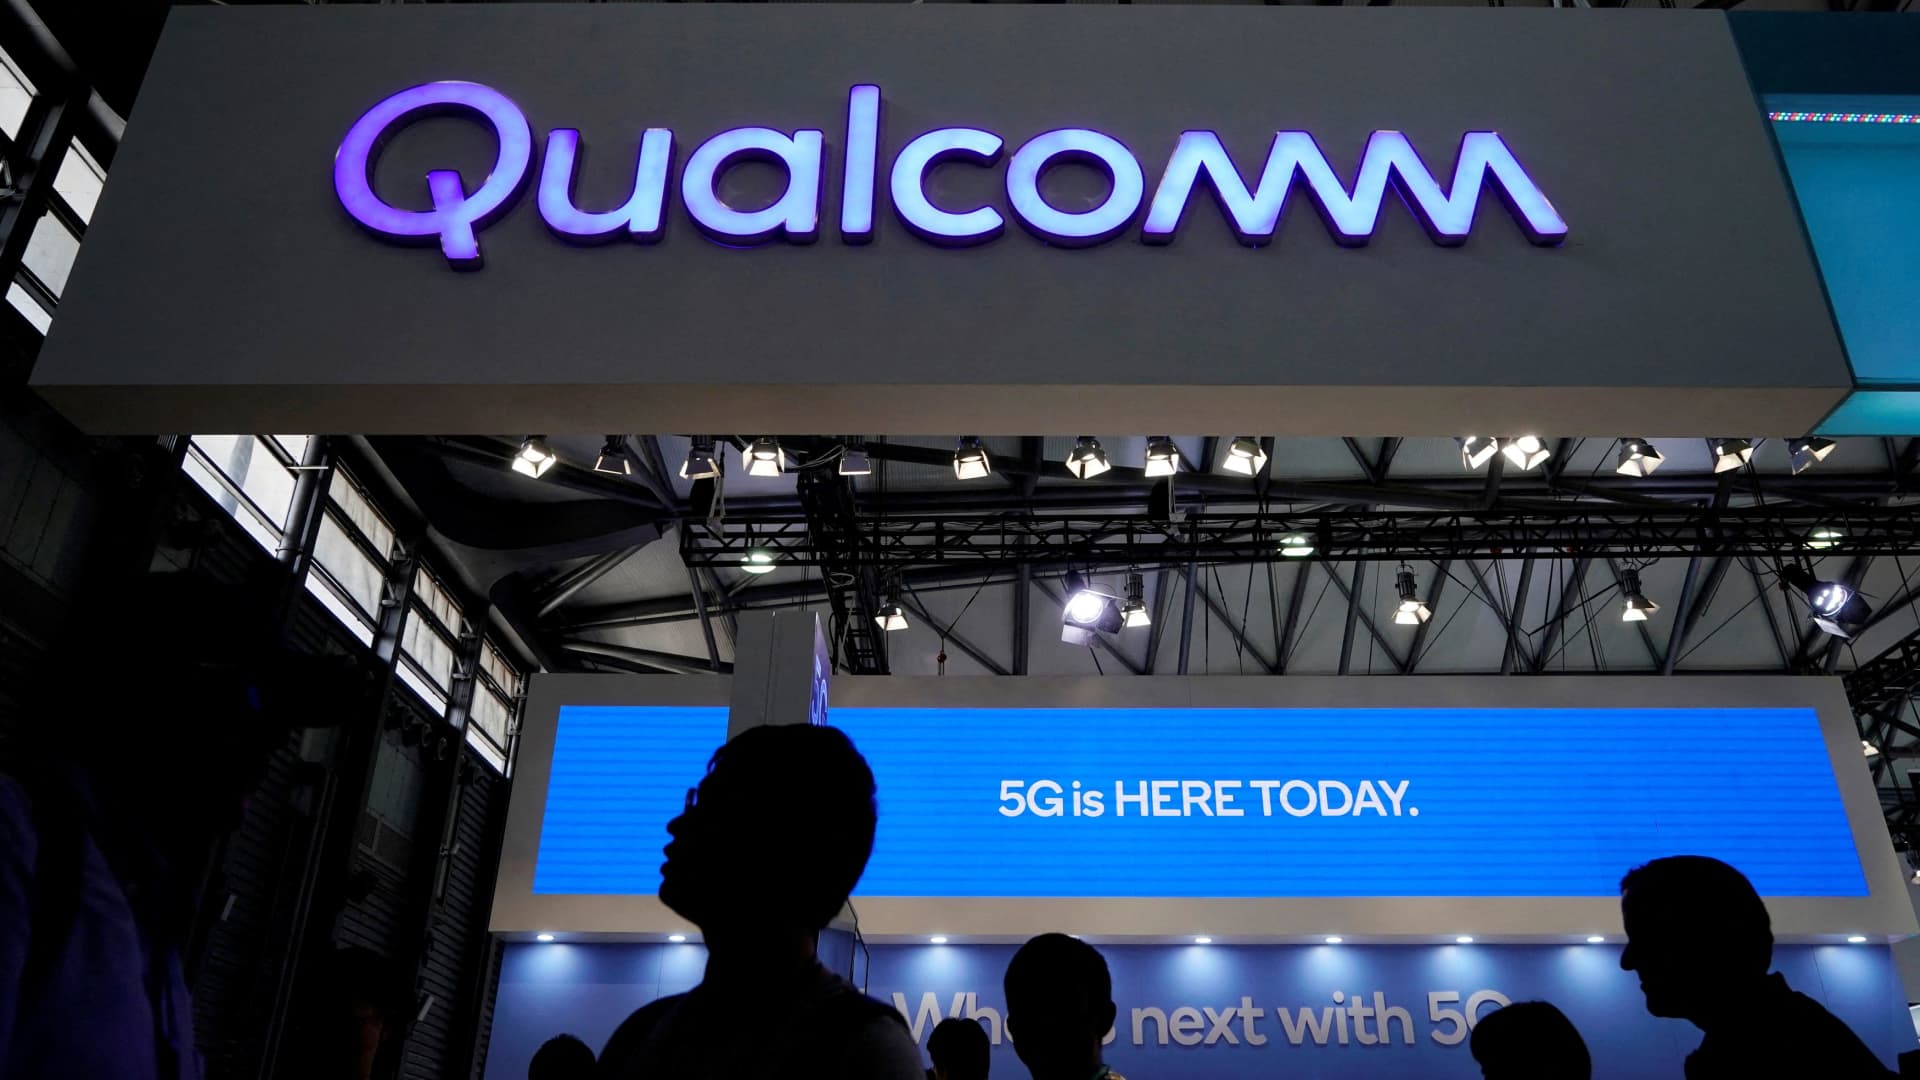 Buy Qualcomm as chipmaker is ready for a post-smartphone world, HSBC says